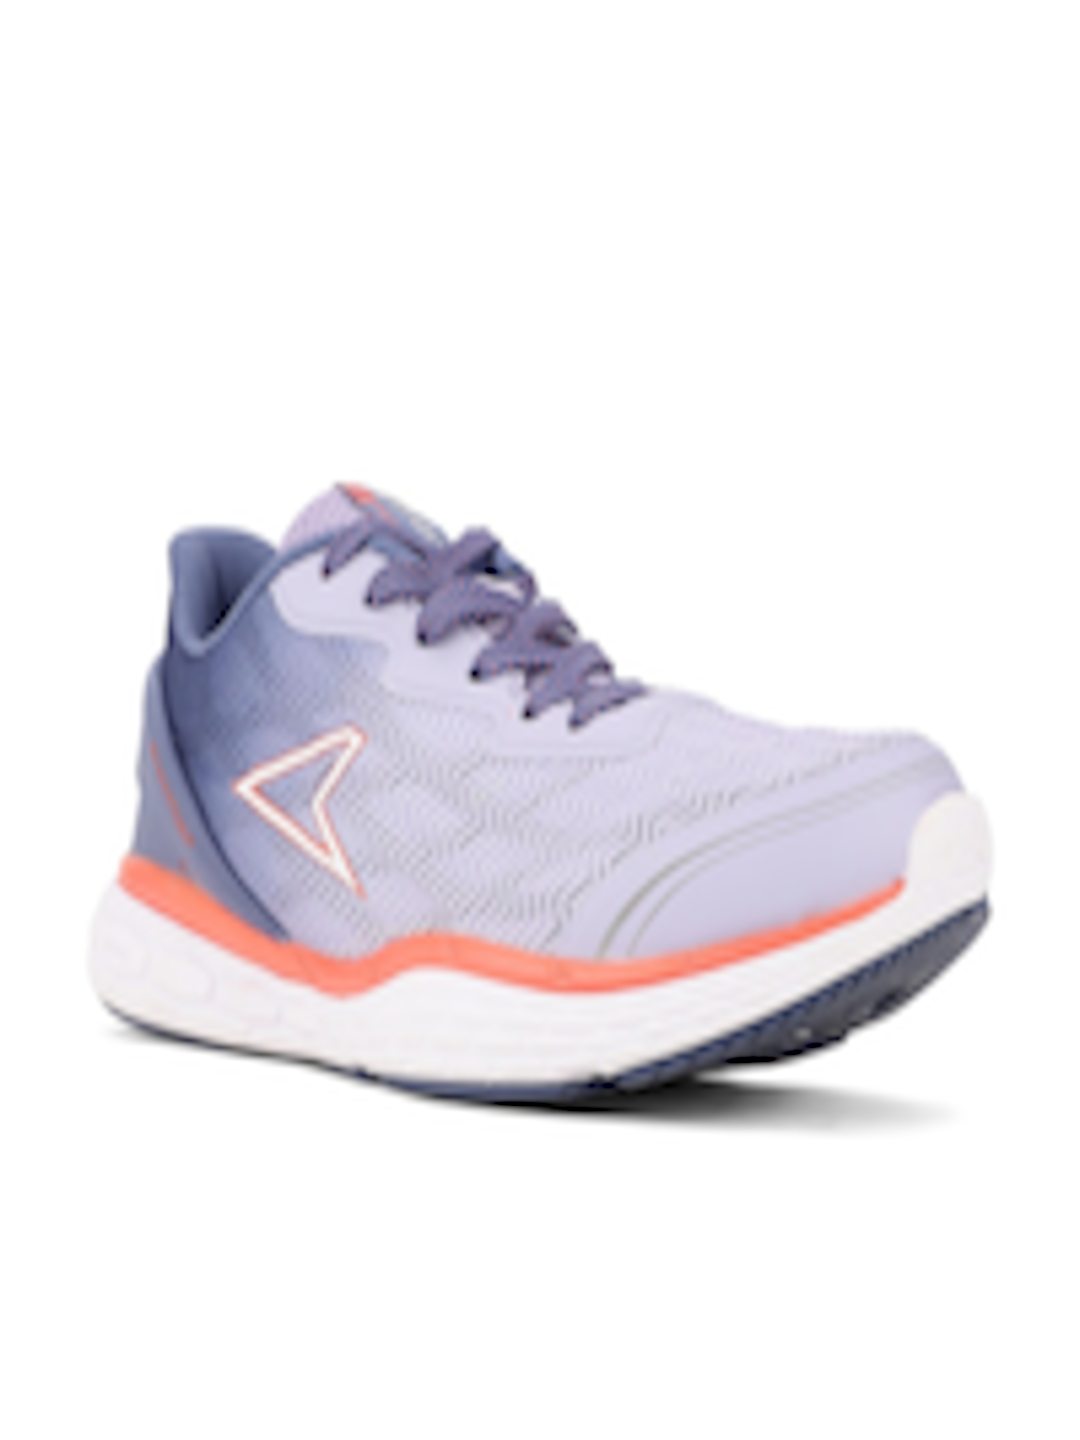 Buy Power Women Blue Textile Running Non Marking Shoes - Sports Shoes ...